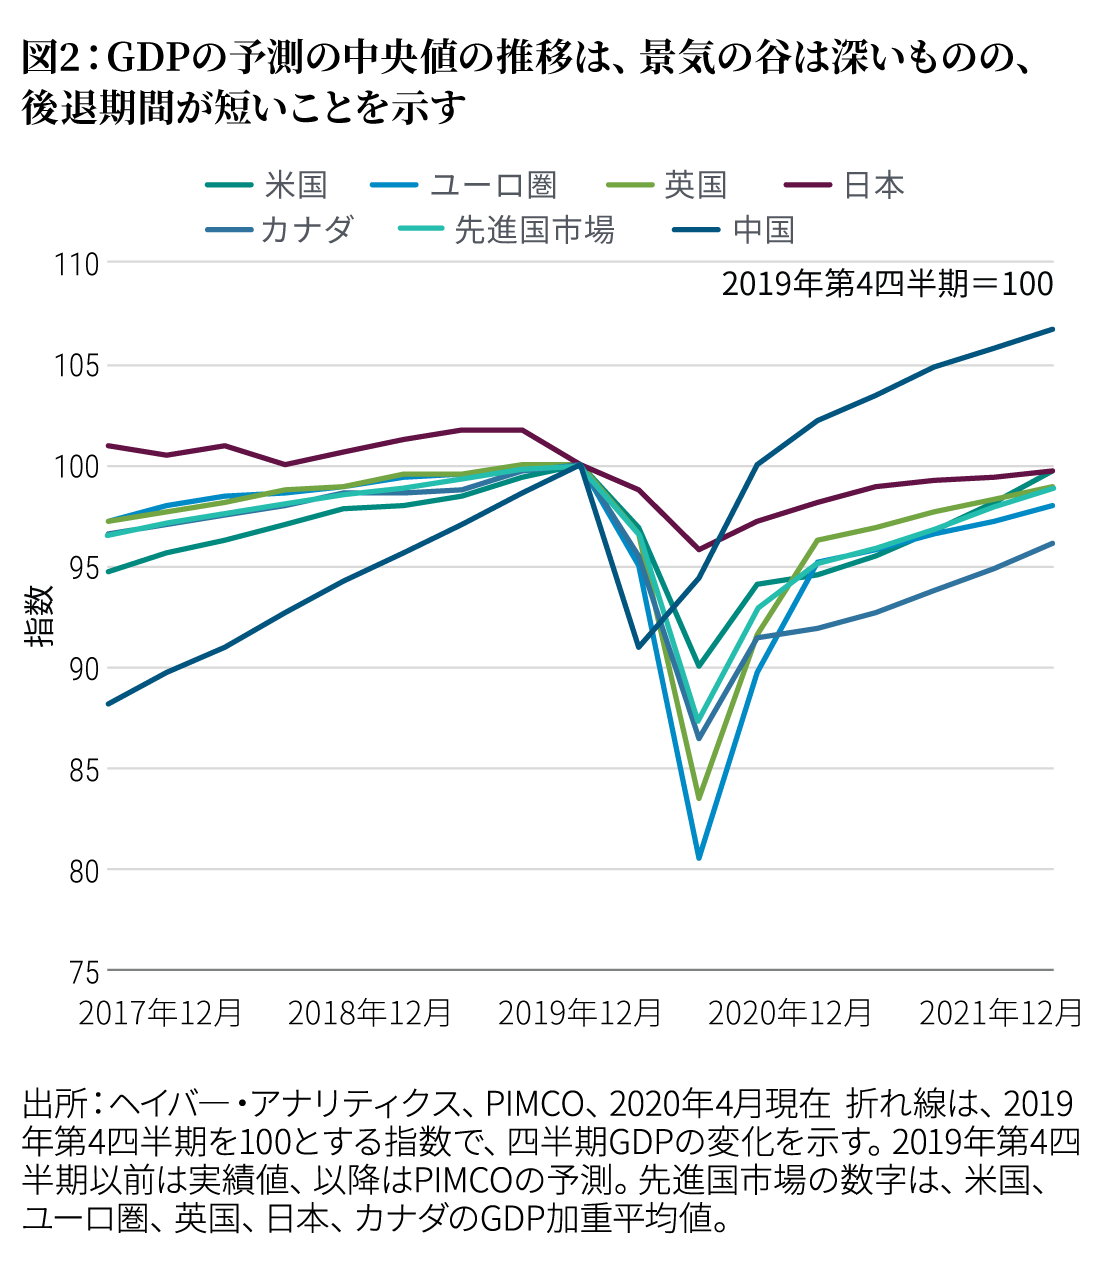 Figure 2 shows PIMCO’s central forecast path for major economies’ GDP, indexed to 100 at the end of fourth quarter 2019. We forecast all the developed economies shown will experience a deep plunge in the second quarter of 2020, with the euro area seeing the steepest decline. China will likely see its trough in the first quarter of 2020. Following the trough, we forecast a gradual recovery.